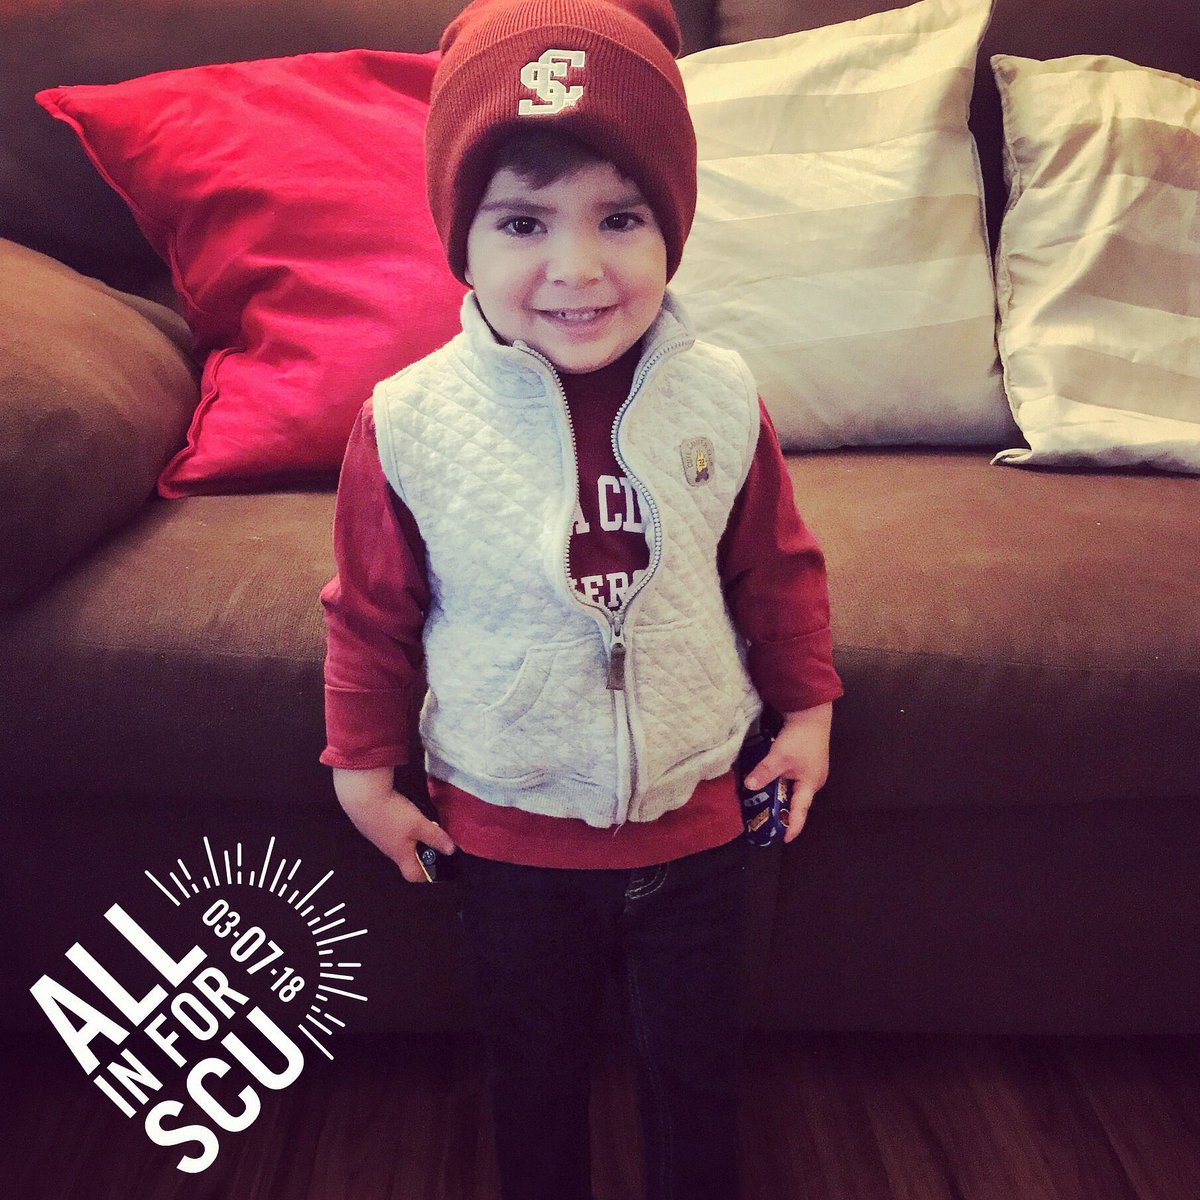 Mateo is #allinforSCU today! Thank you to those who have already donated. If you haven’t already, what are you waiting for! There are a variety of funds/departments to contribute to. Every gift counts no matter the dollar amount. goo.gl/QnfR2D